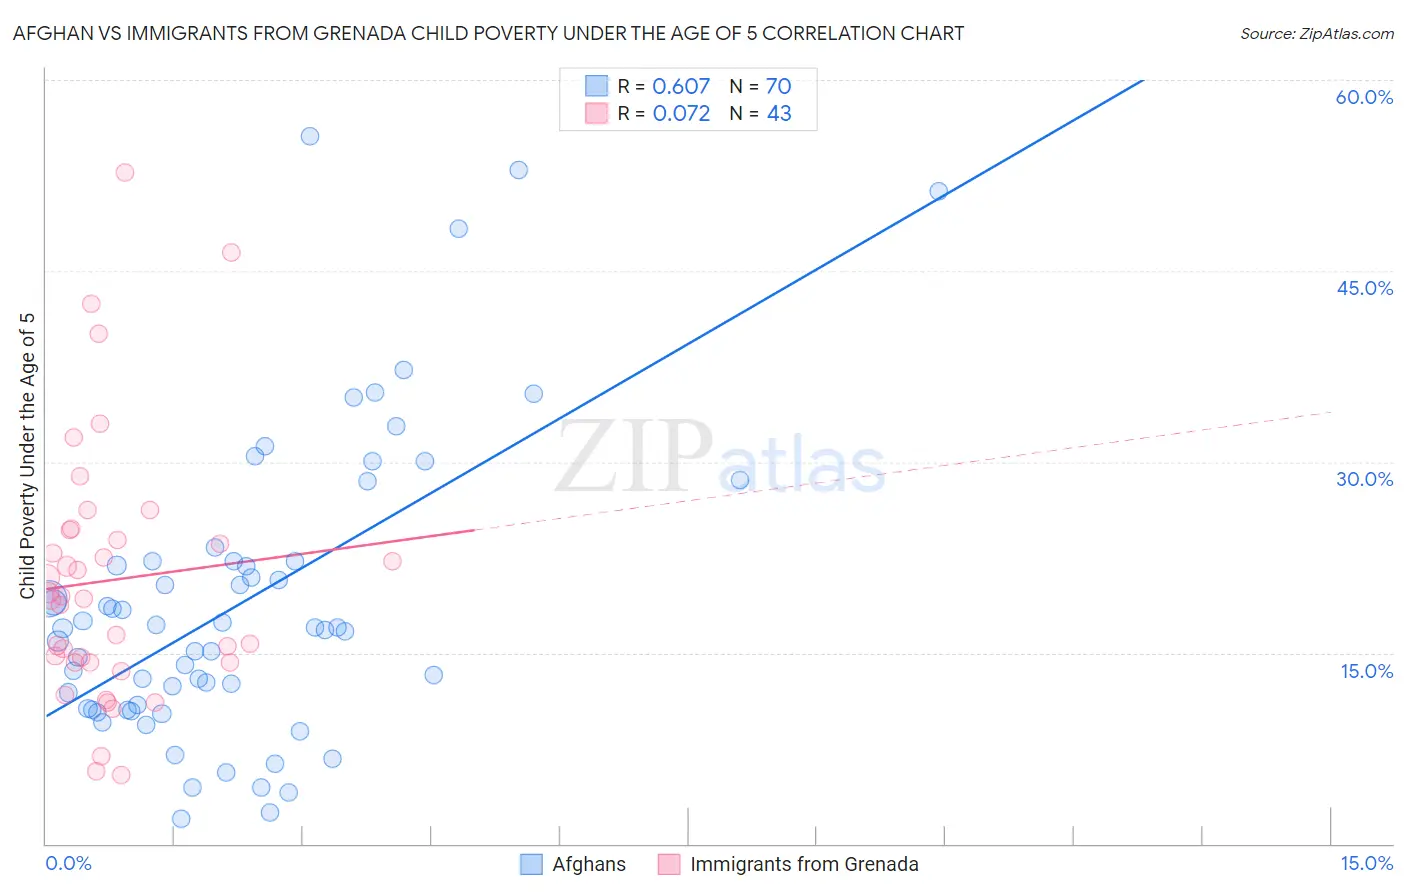 Afghan vs Immigrants from Grenada Child Poverty Under the Age of 5